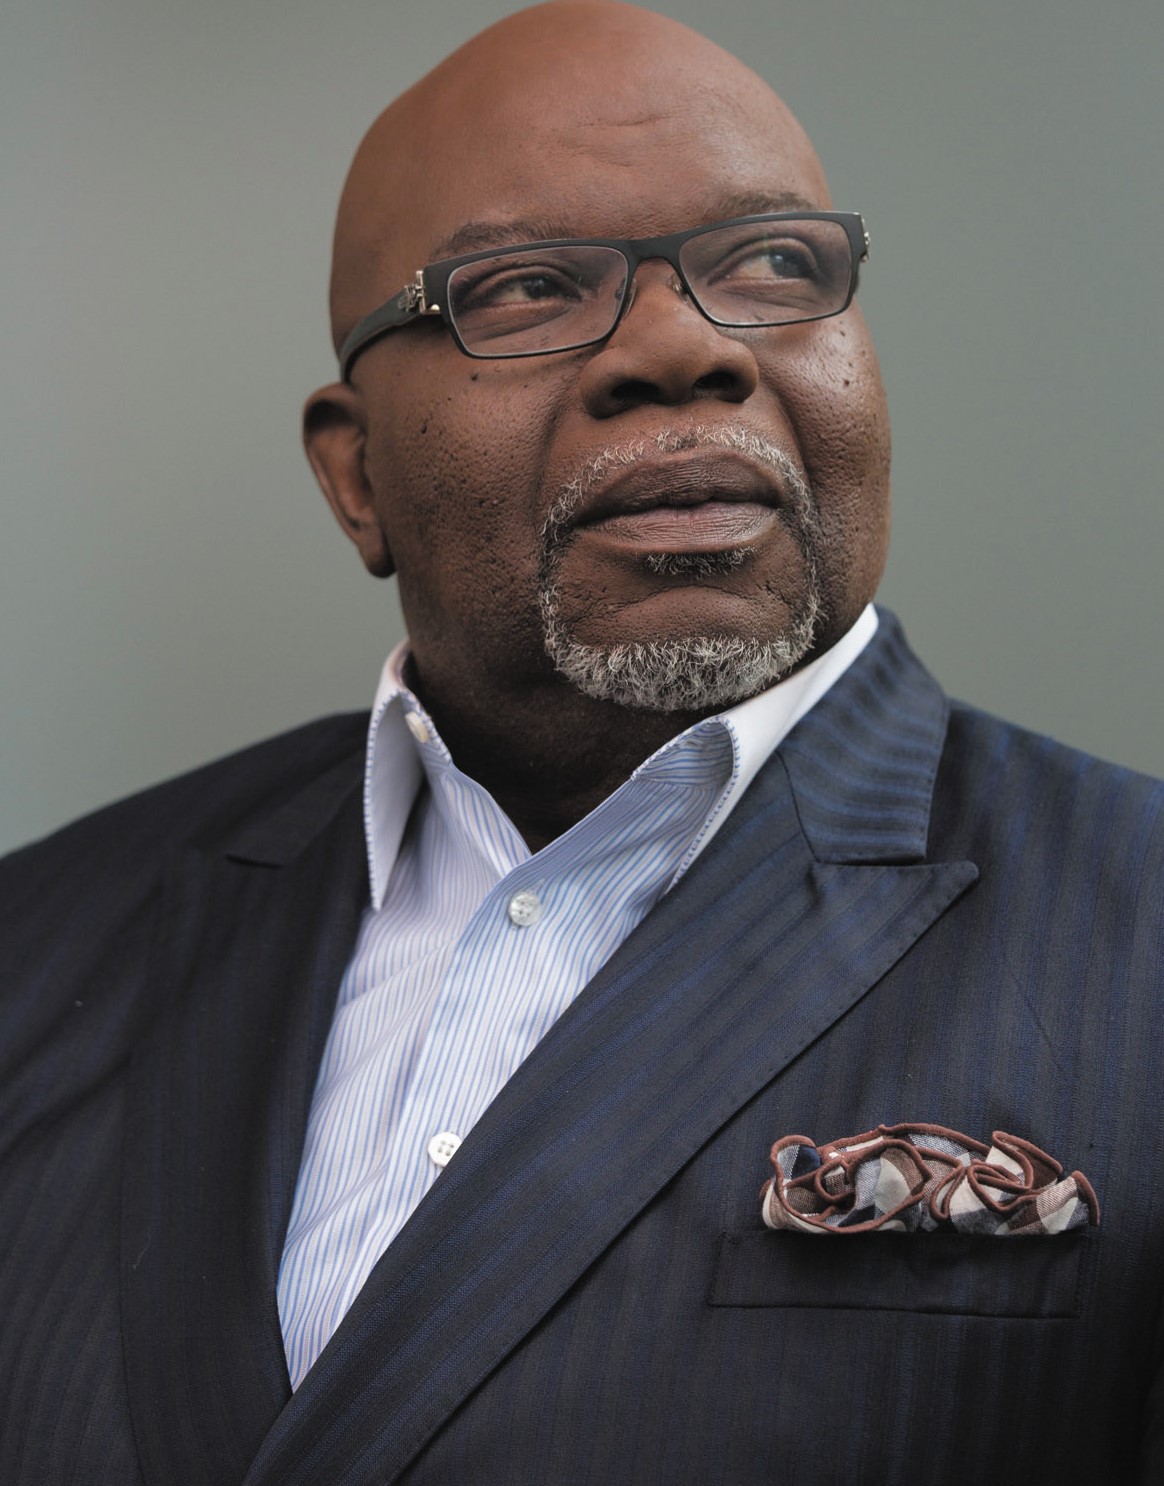 T.D. Jakes Biography, Age, Wife, Books, Youtube, House.